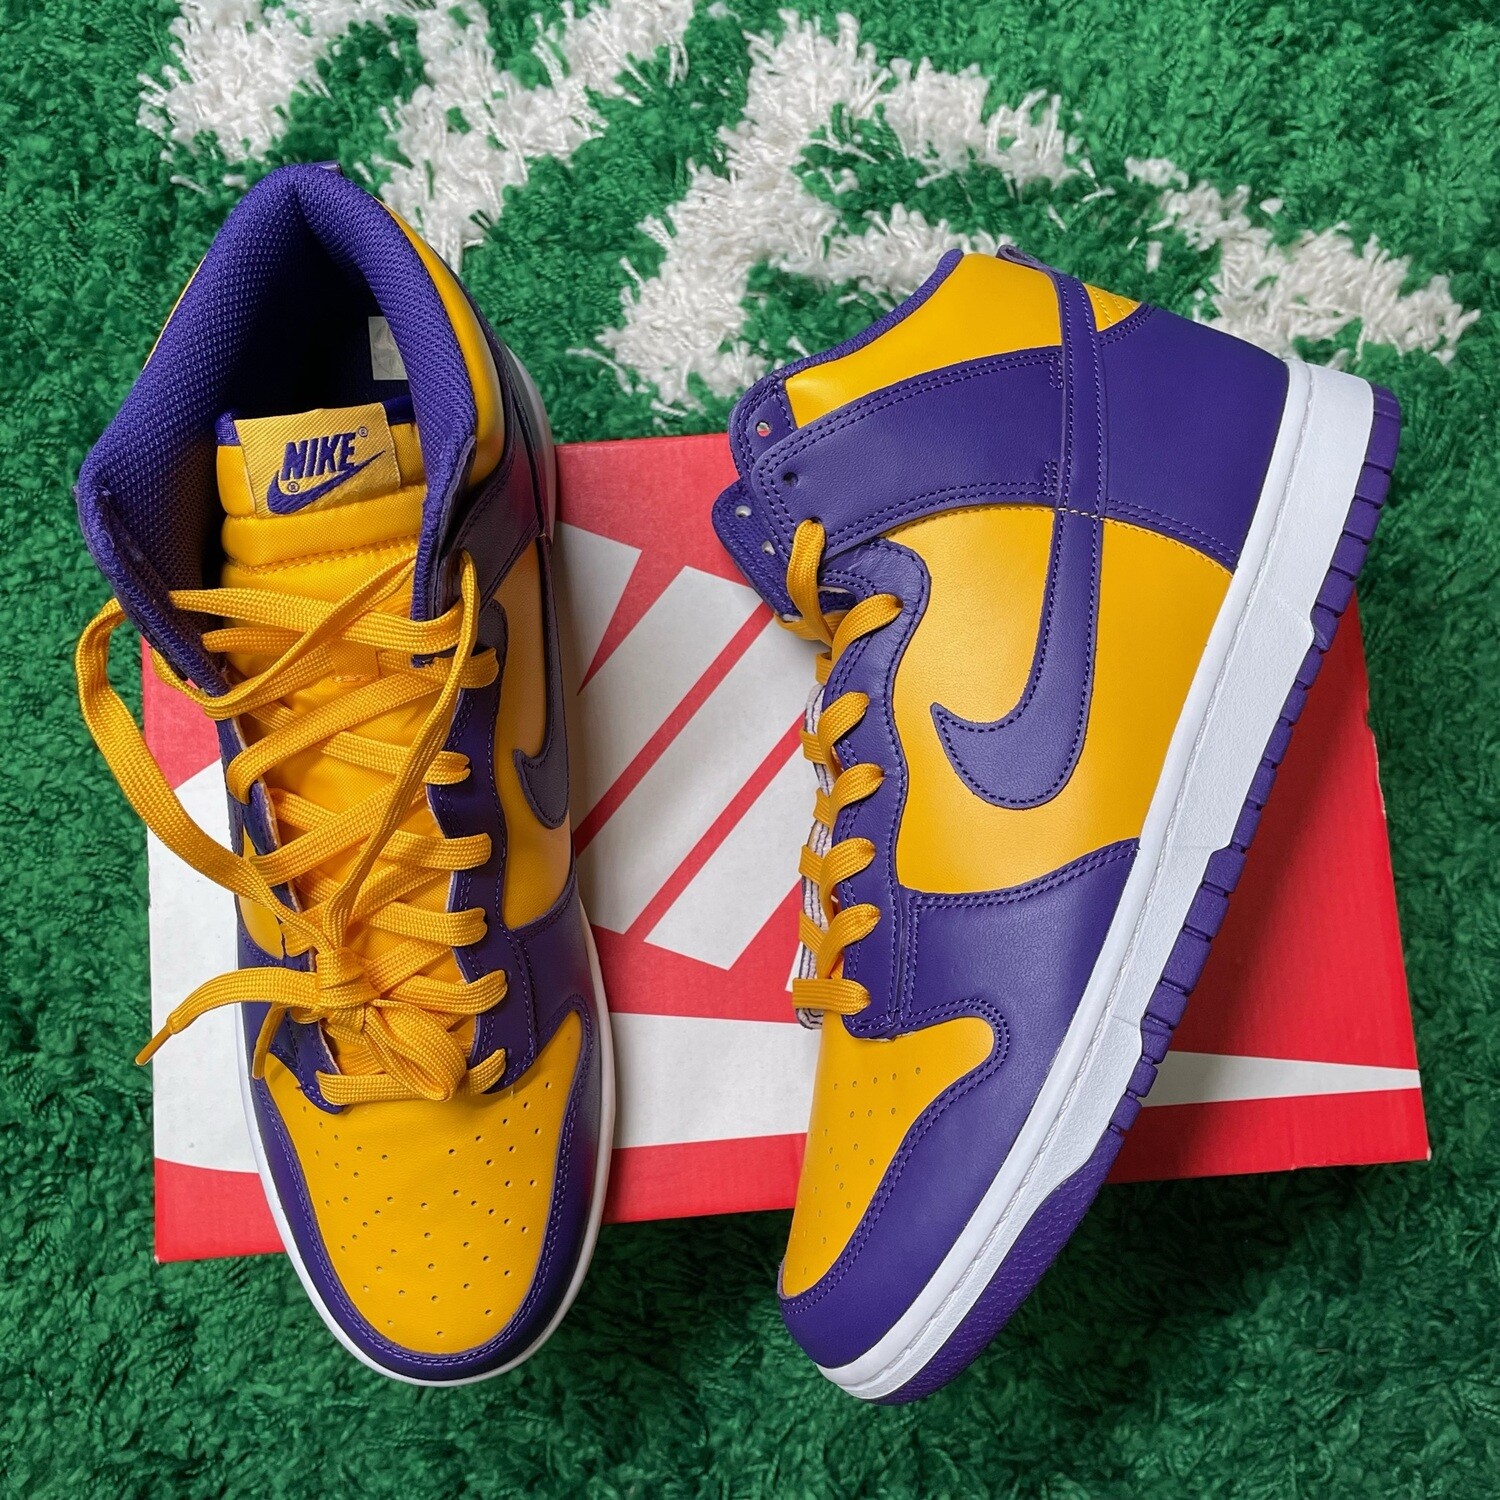 Nike Dunk High Lakers Size 12M/13.5W